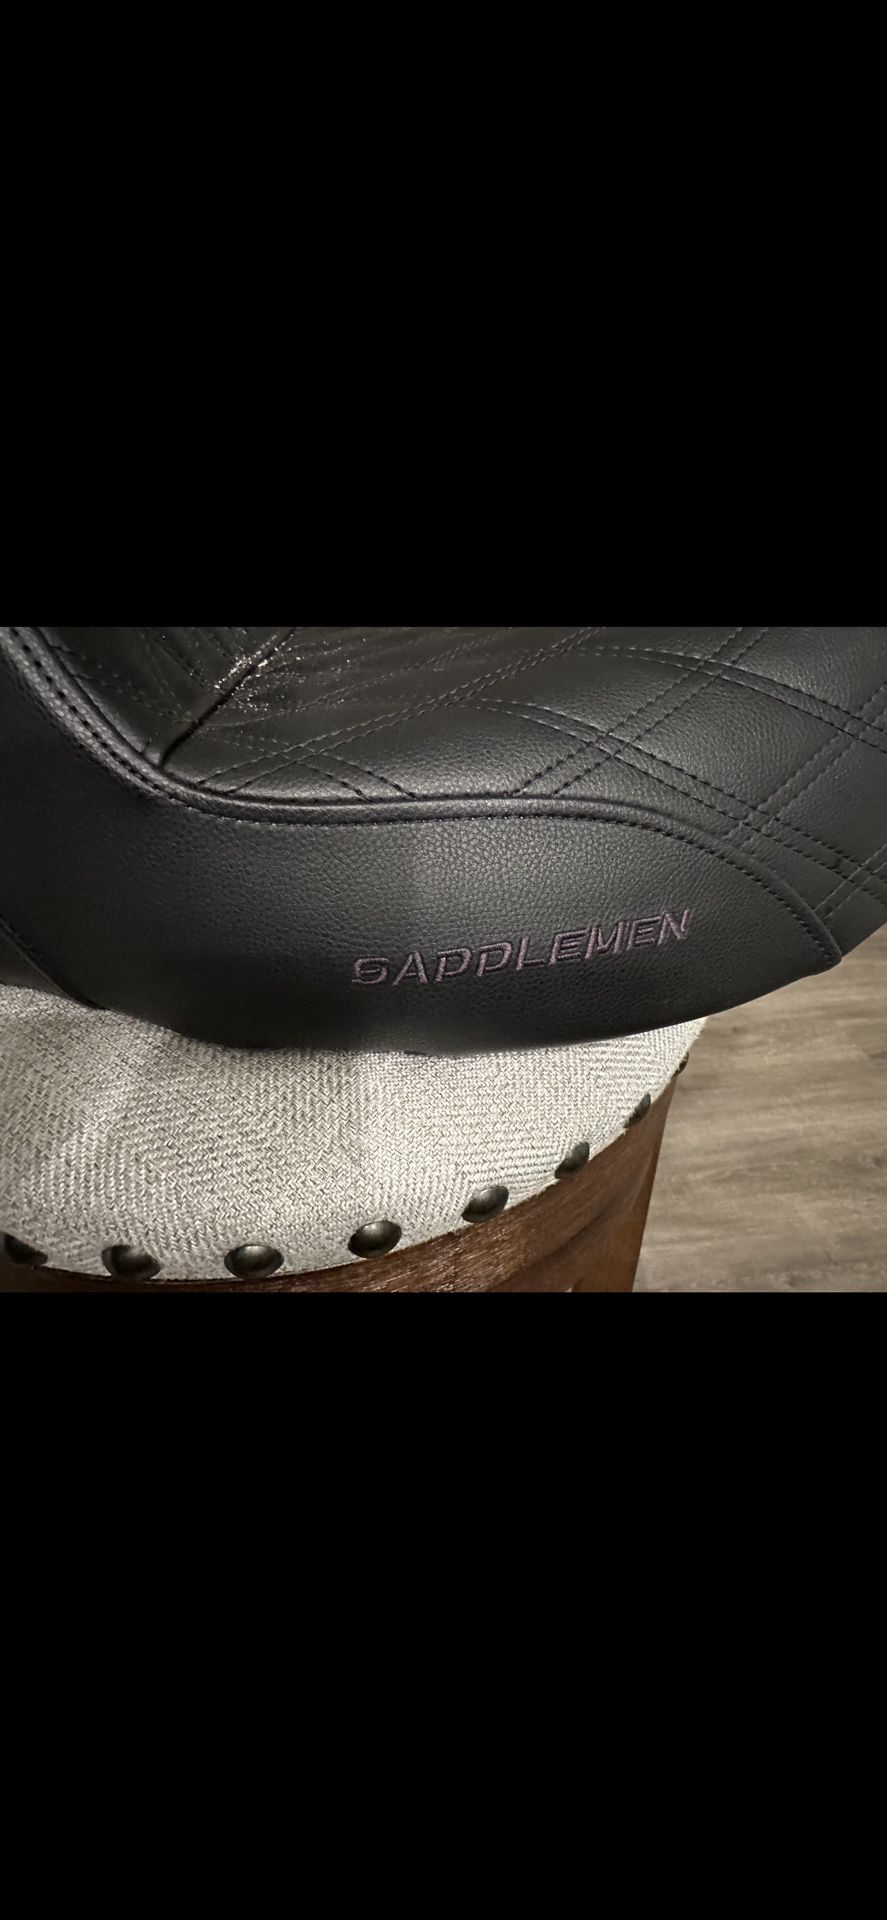 MARKED DOWN: Saddlemen Tour Step-Up Seat - Like New